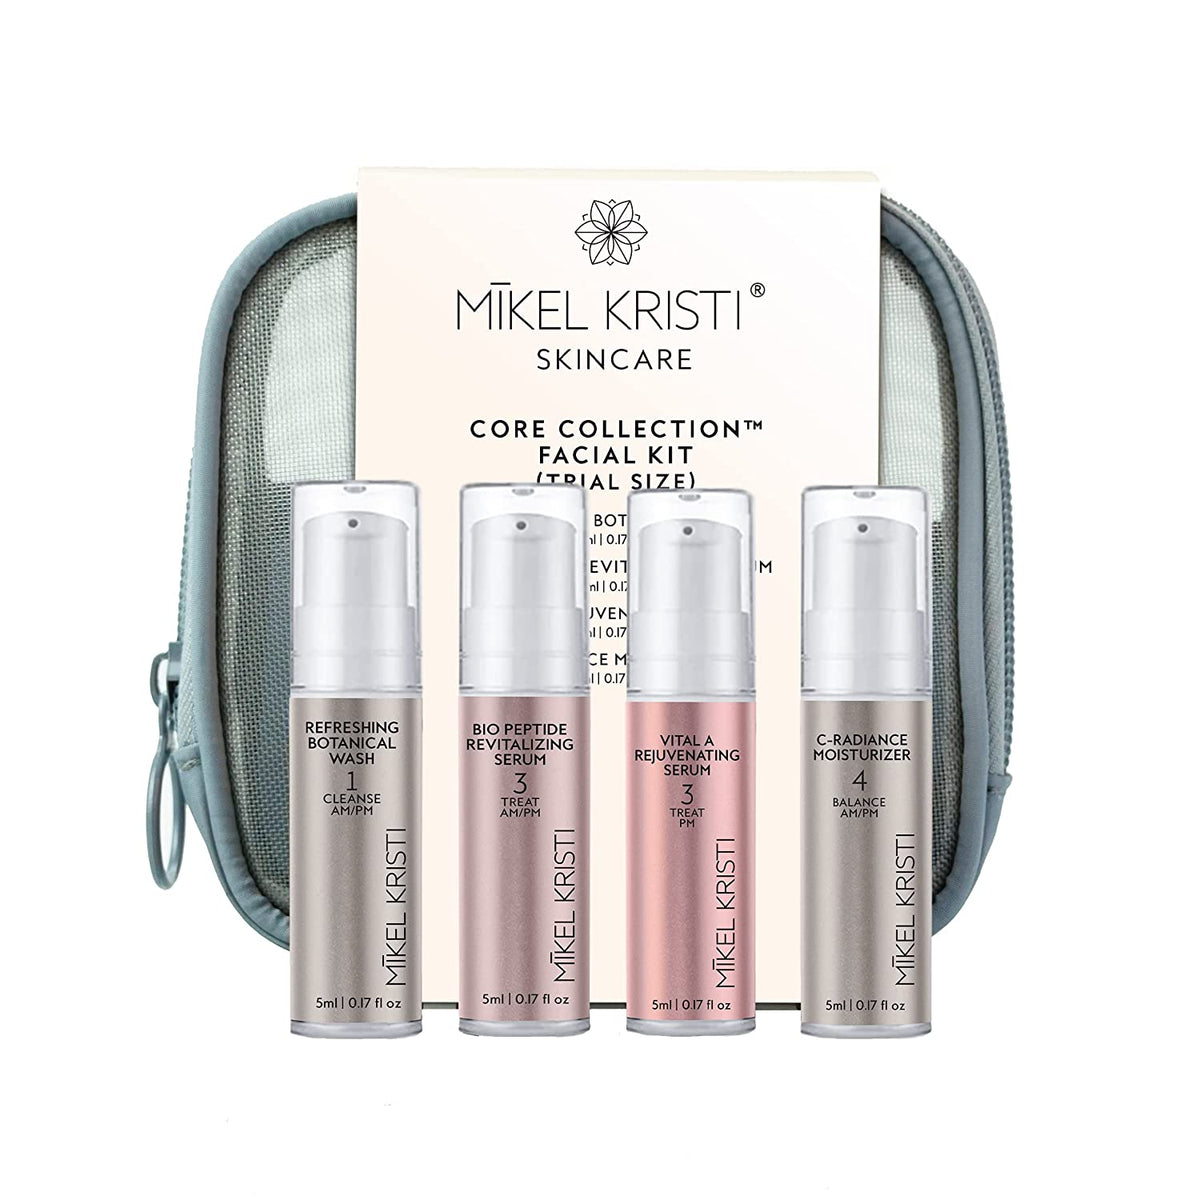 Core Collection Facial Kit (Trial Size)